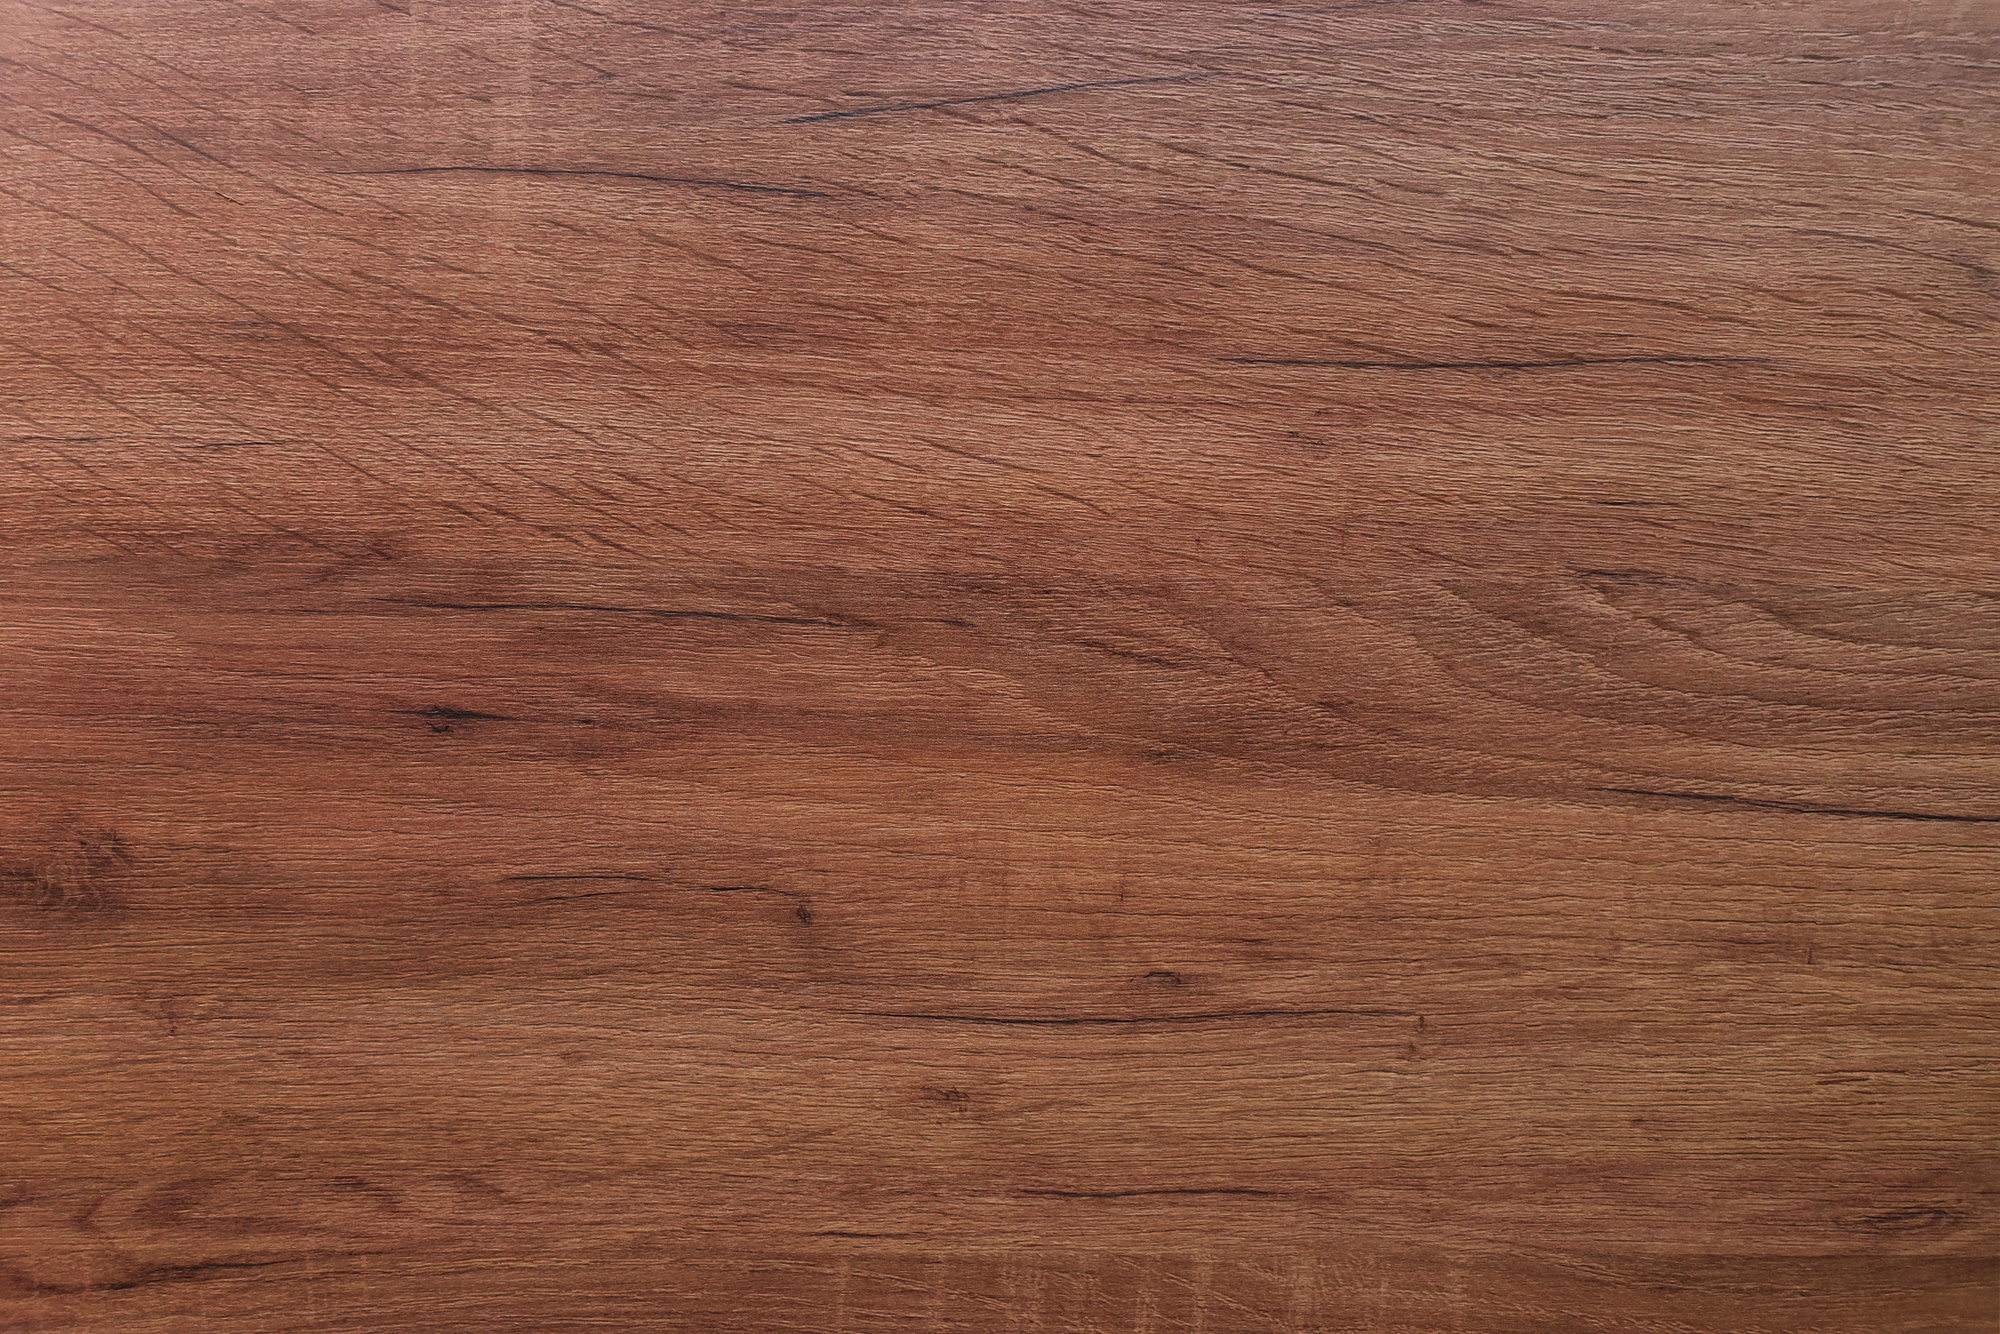 Grained Wood Background